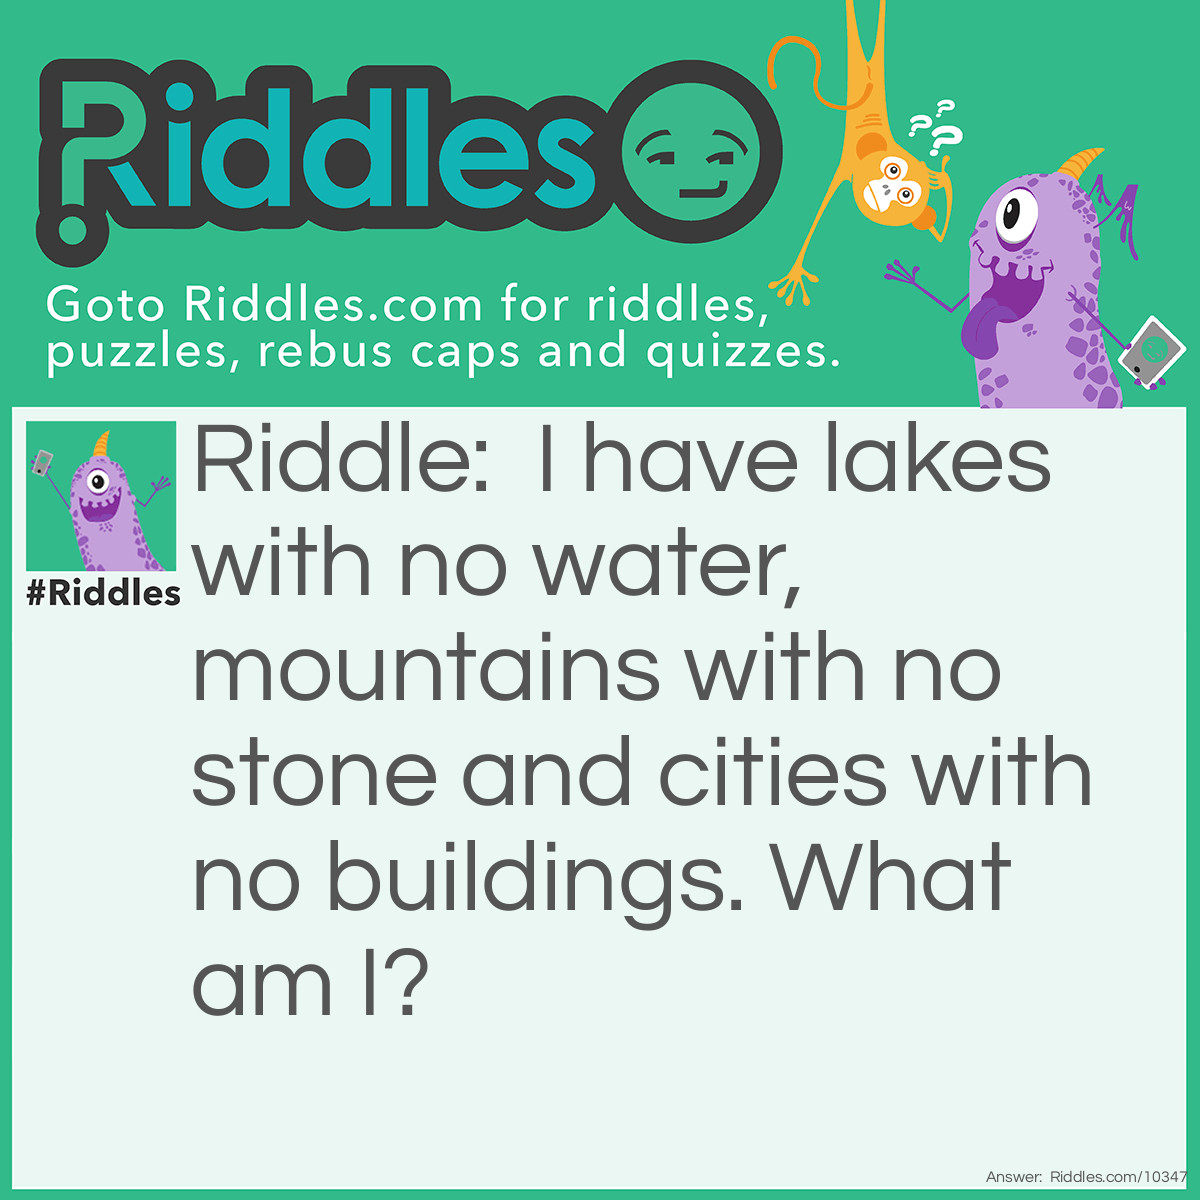 Riddle: I have lakes with no water, mountains with no stone and cities with no buildings. What am I? Answer: A map.